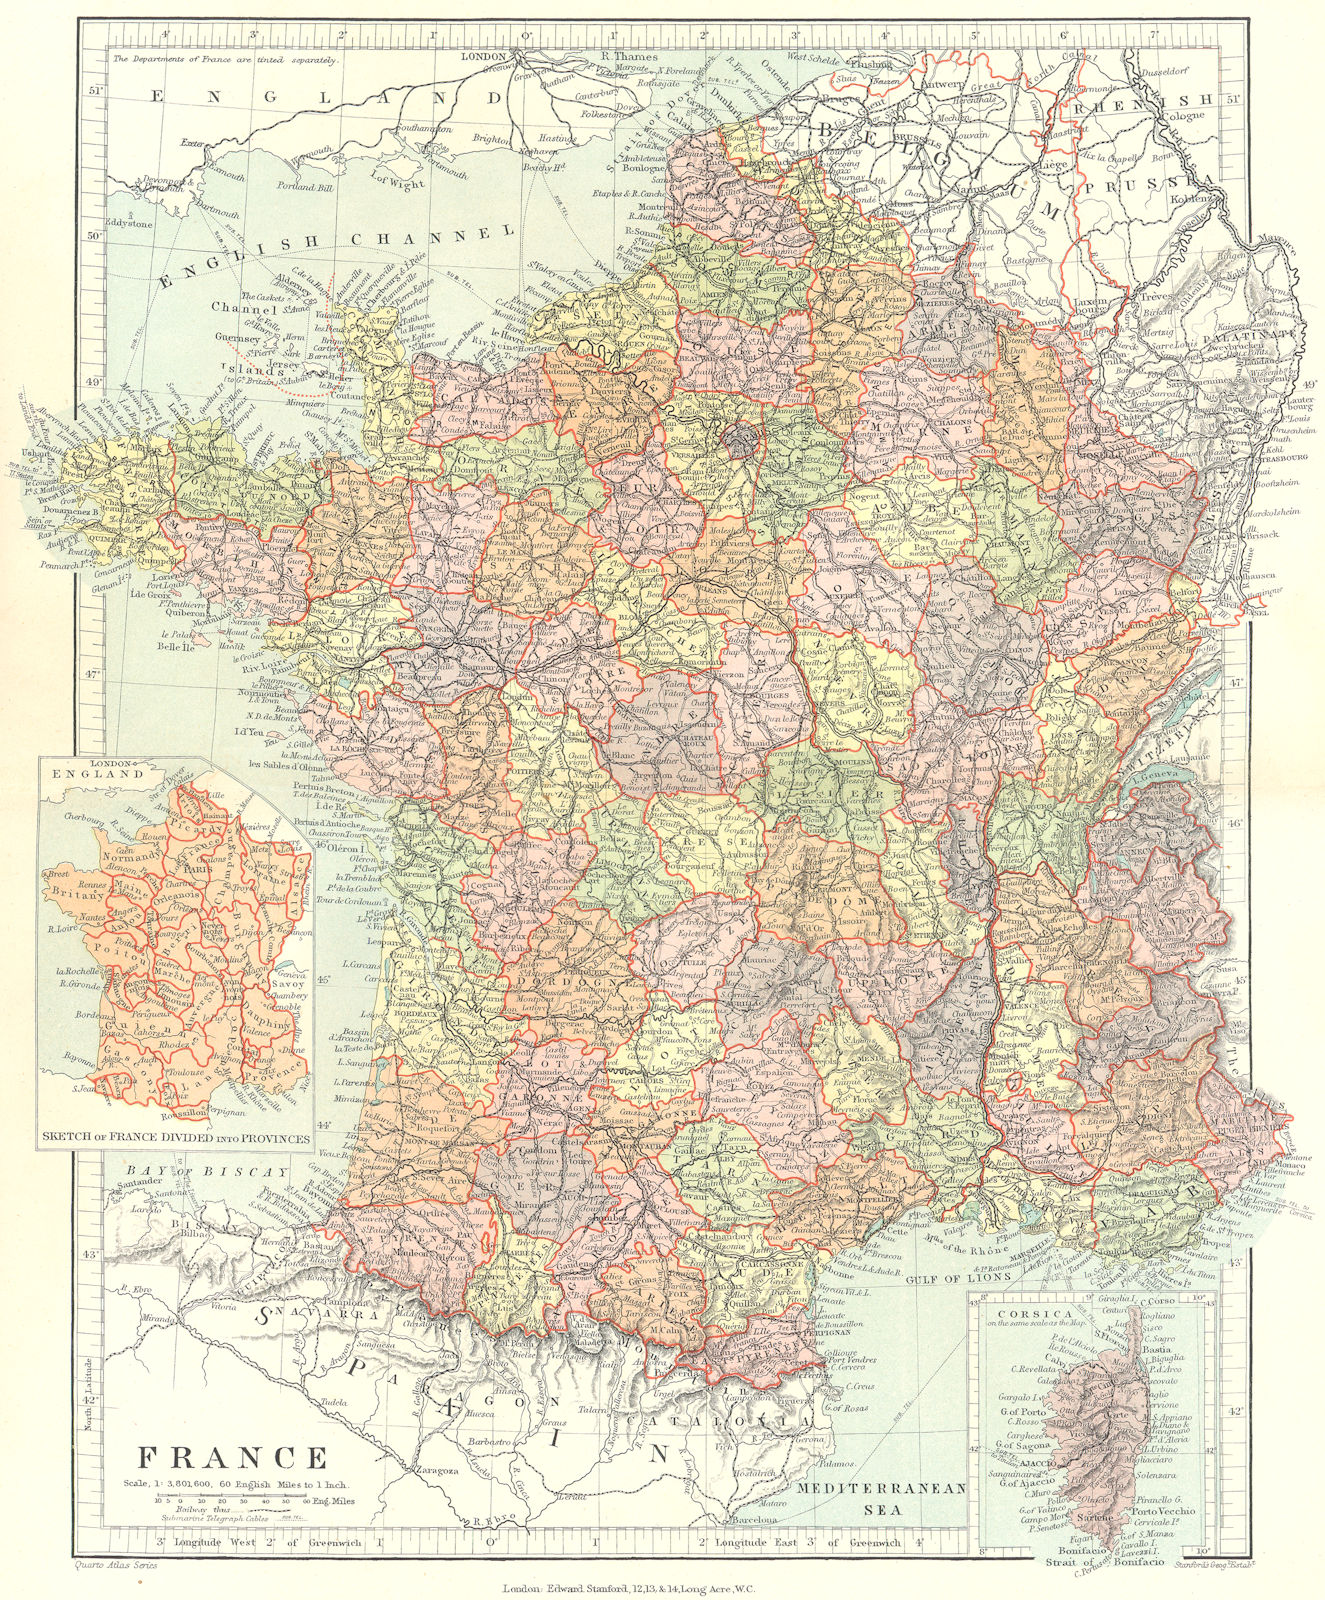 Associate Product FRANCE. in departments, w/o Alsace Lorraine. Inset provinces. STANFORD 1906 map